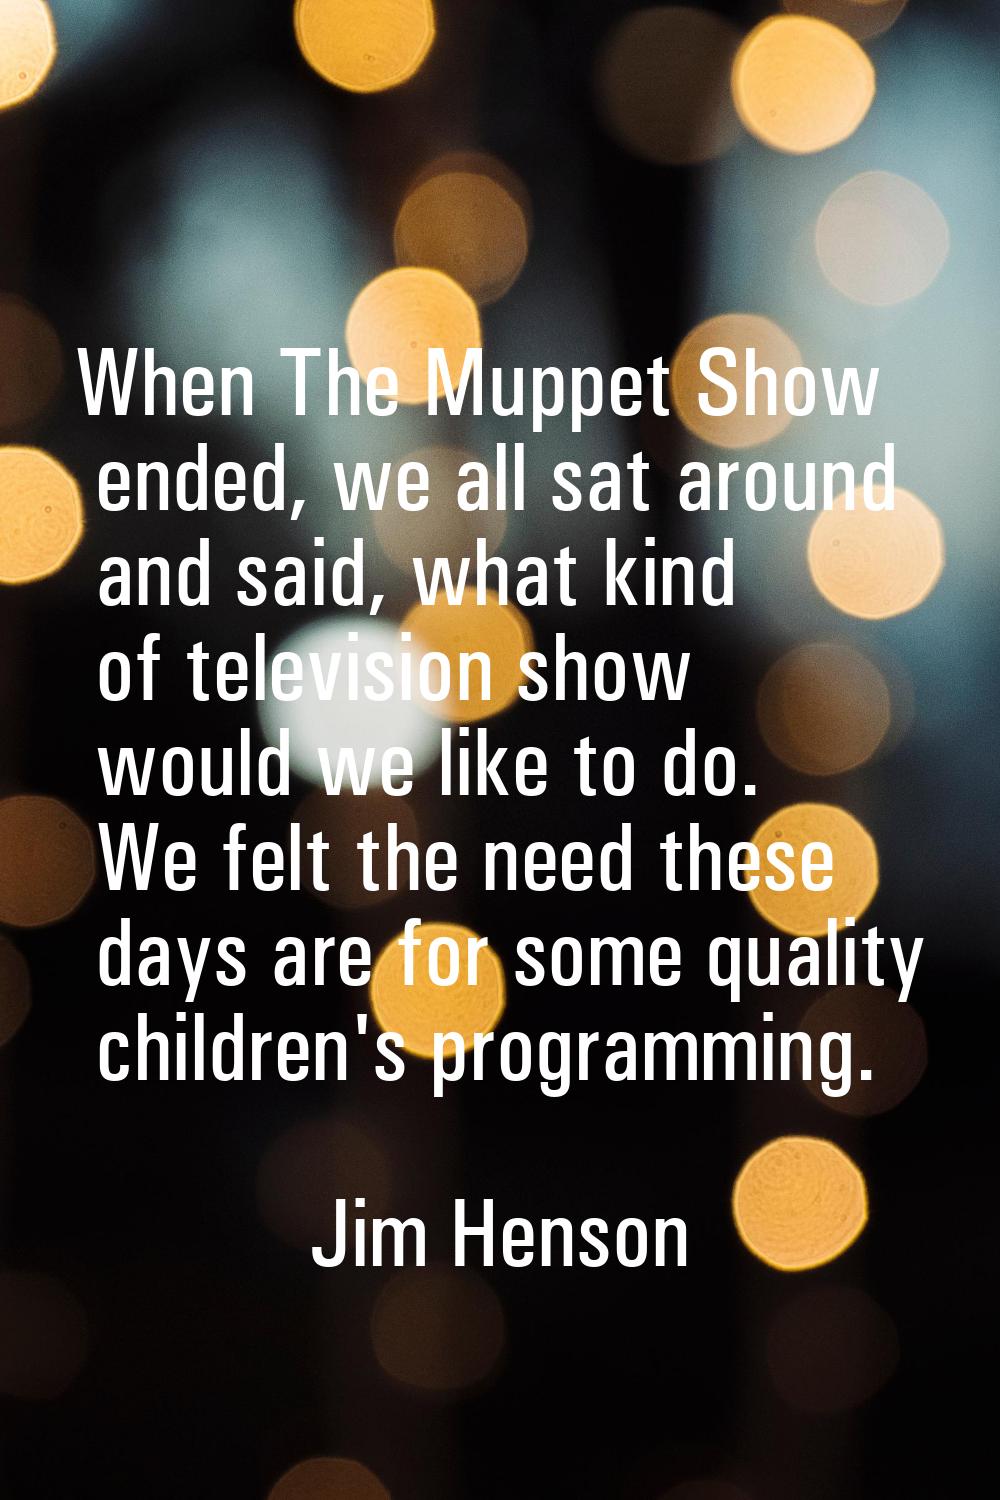 When The Muppet Show ended, we all sat around and said, what kind of television show would we like 